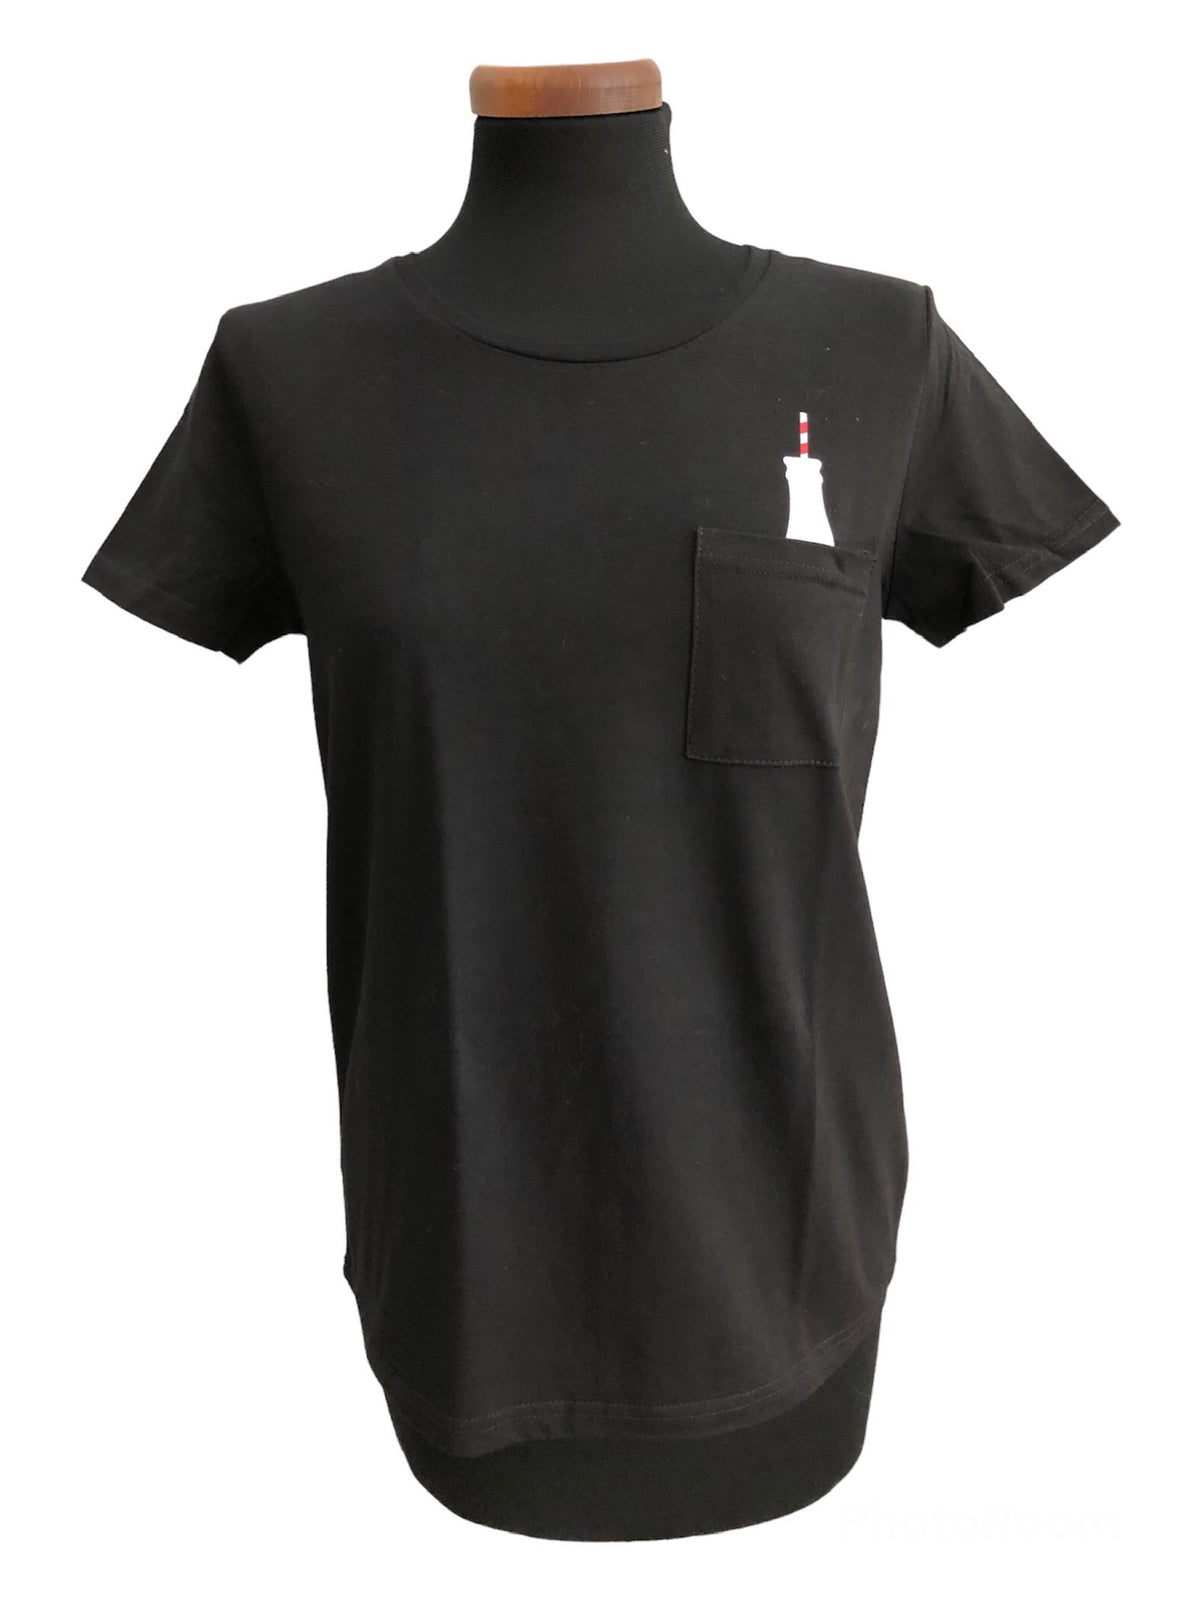 Black T-Shirt with front pocket